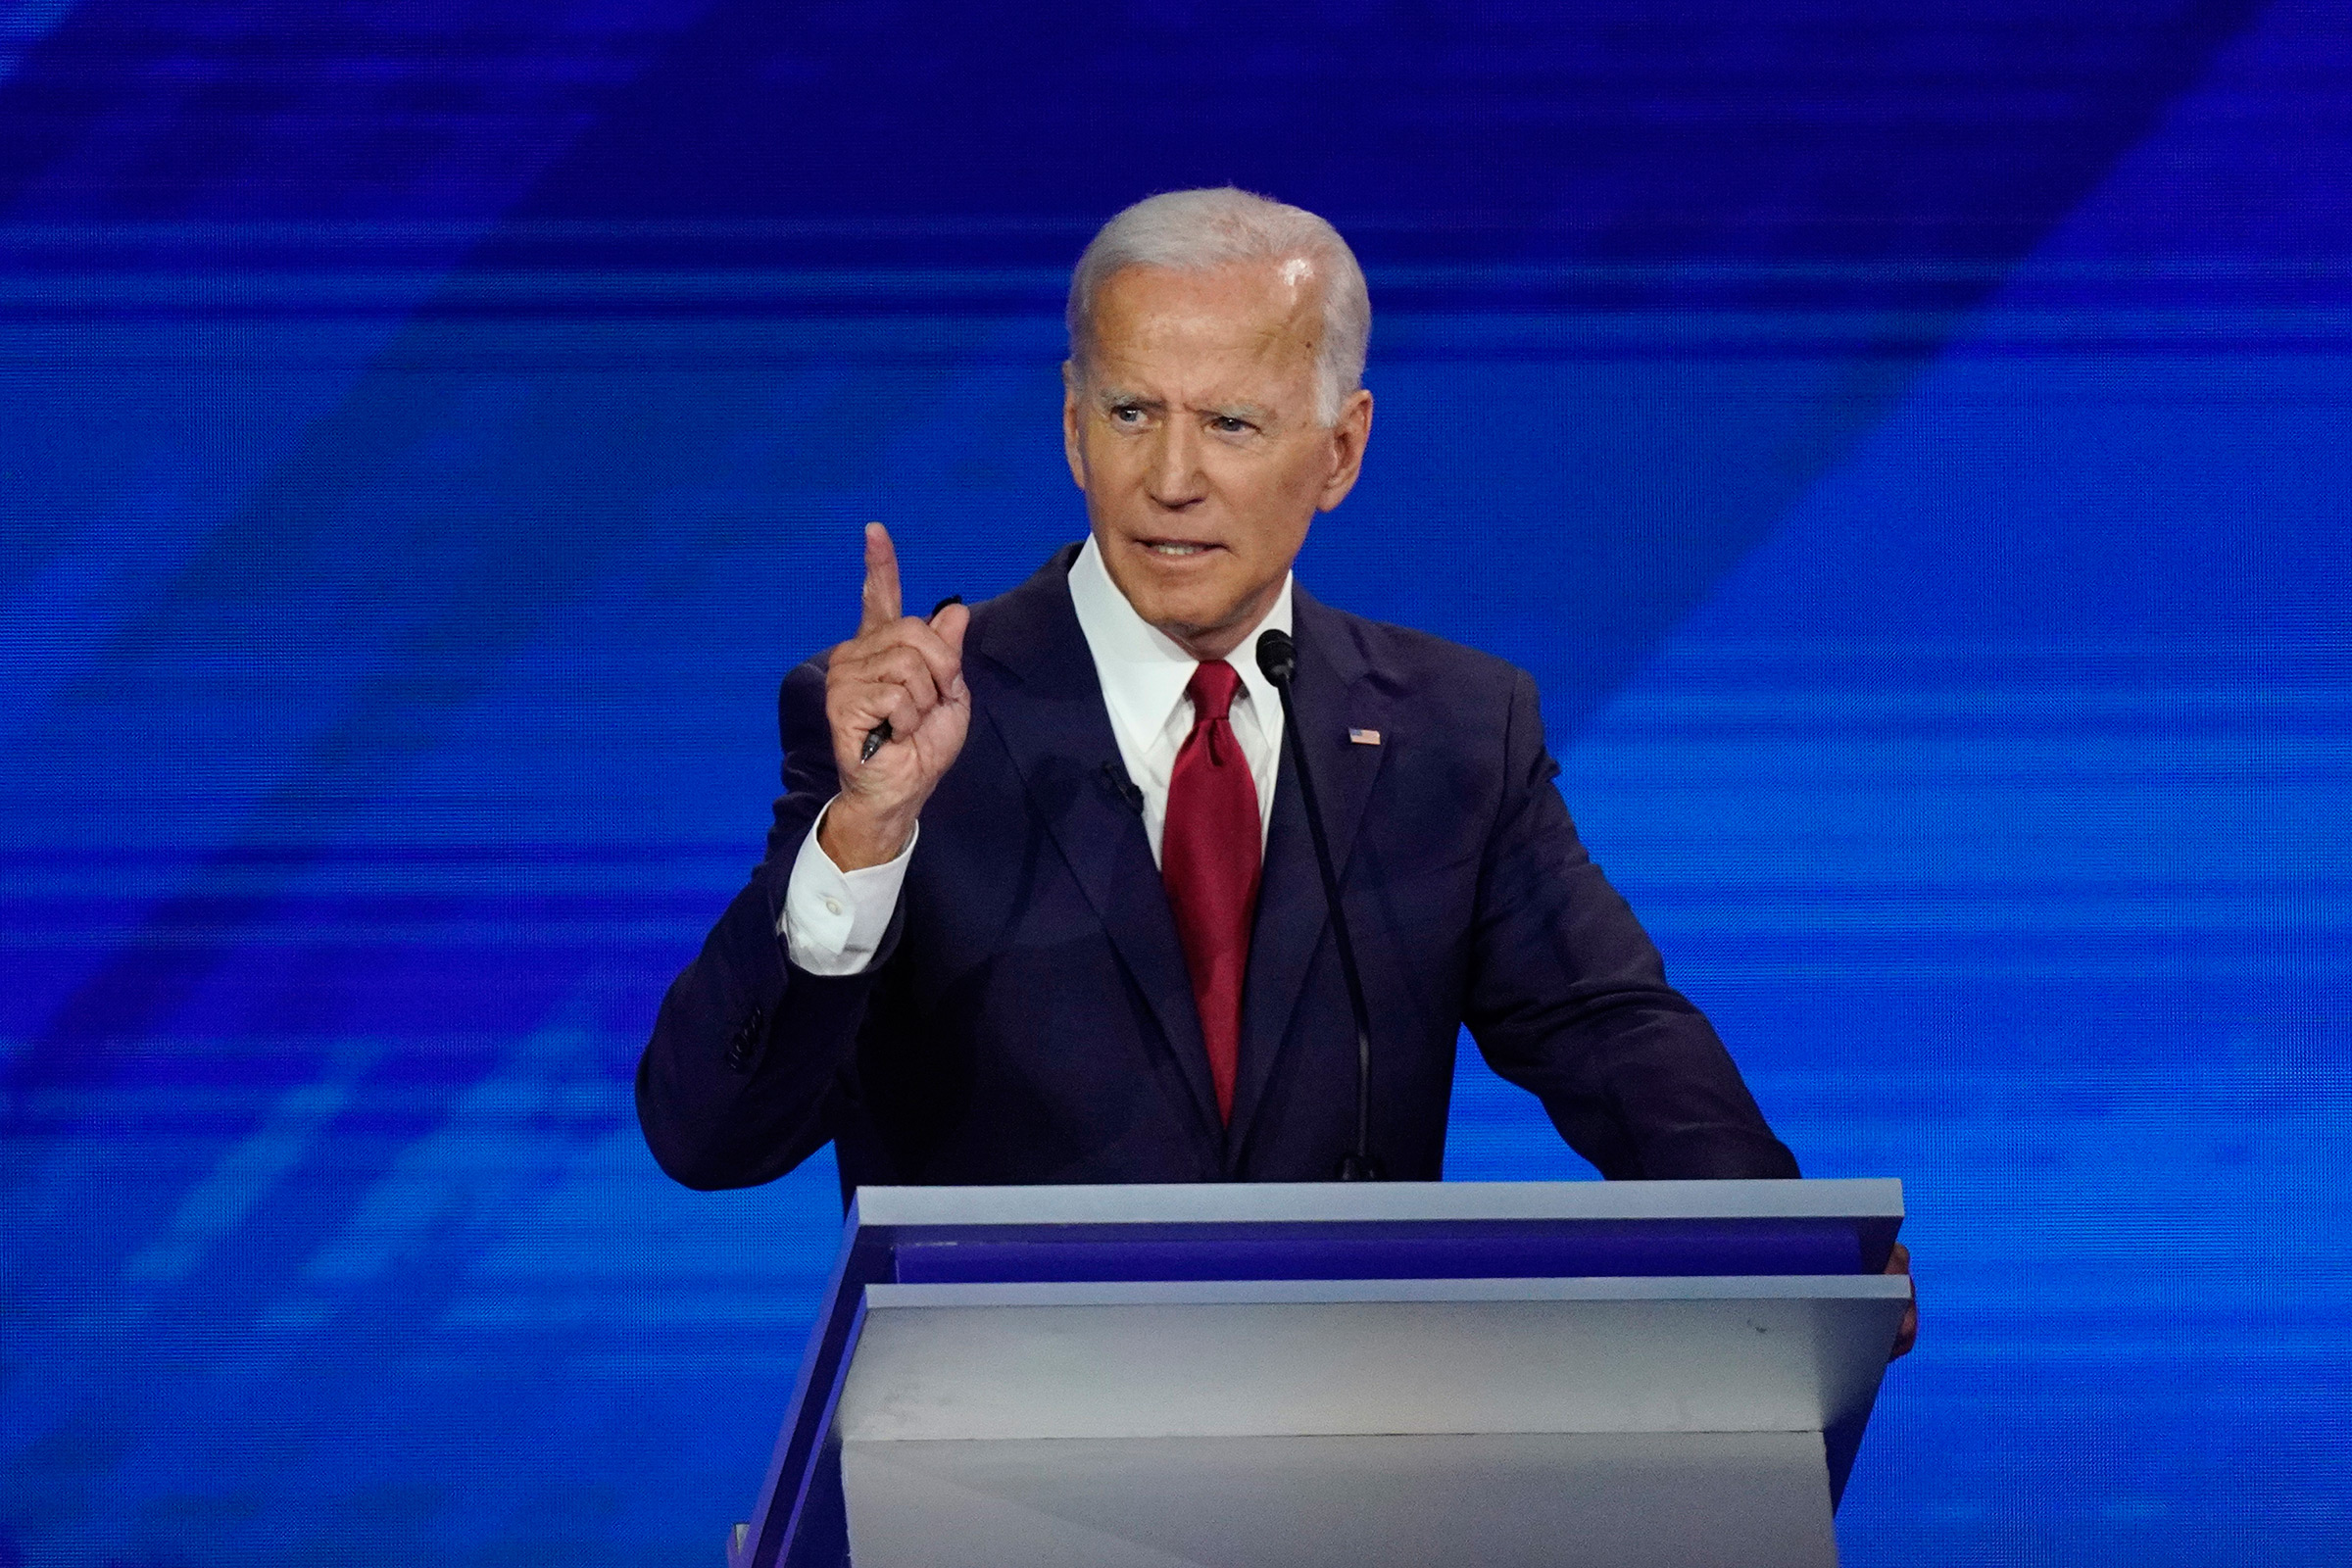 Former Vice President Joe Biden responds to a question Sept. 12, 2019, during a Democratic presidential primary debate hosted by ABC at Texas Southern University in Houston. (David J. Phillip—AP)